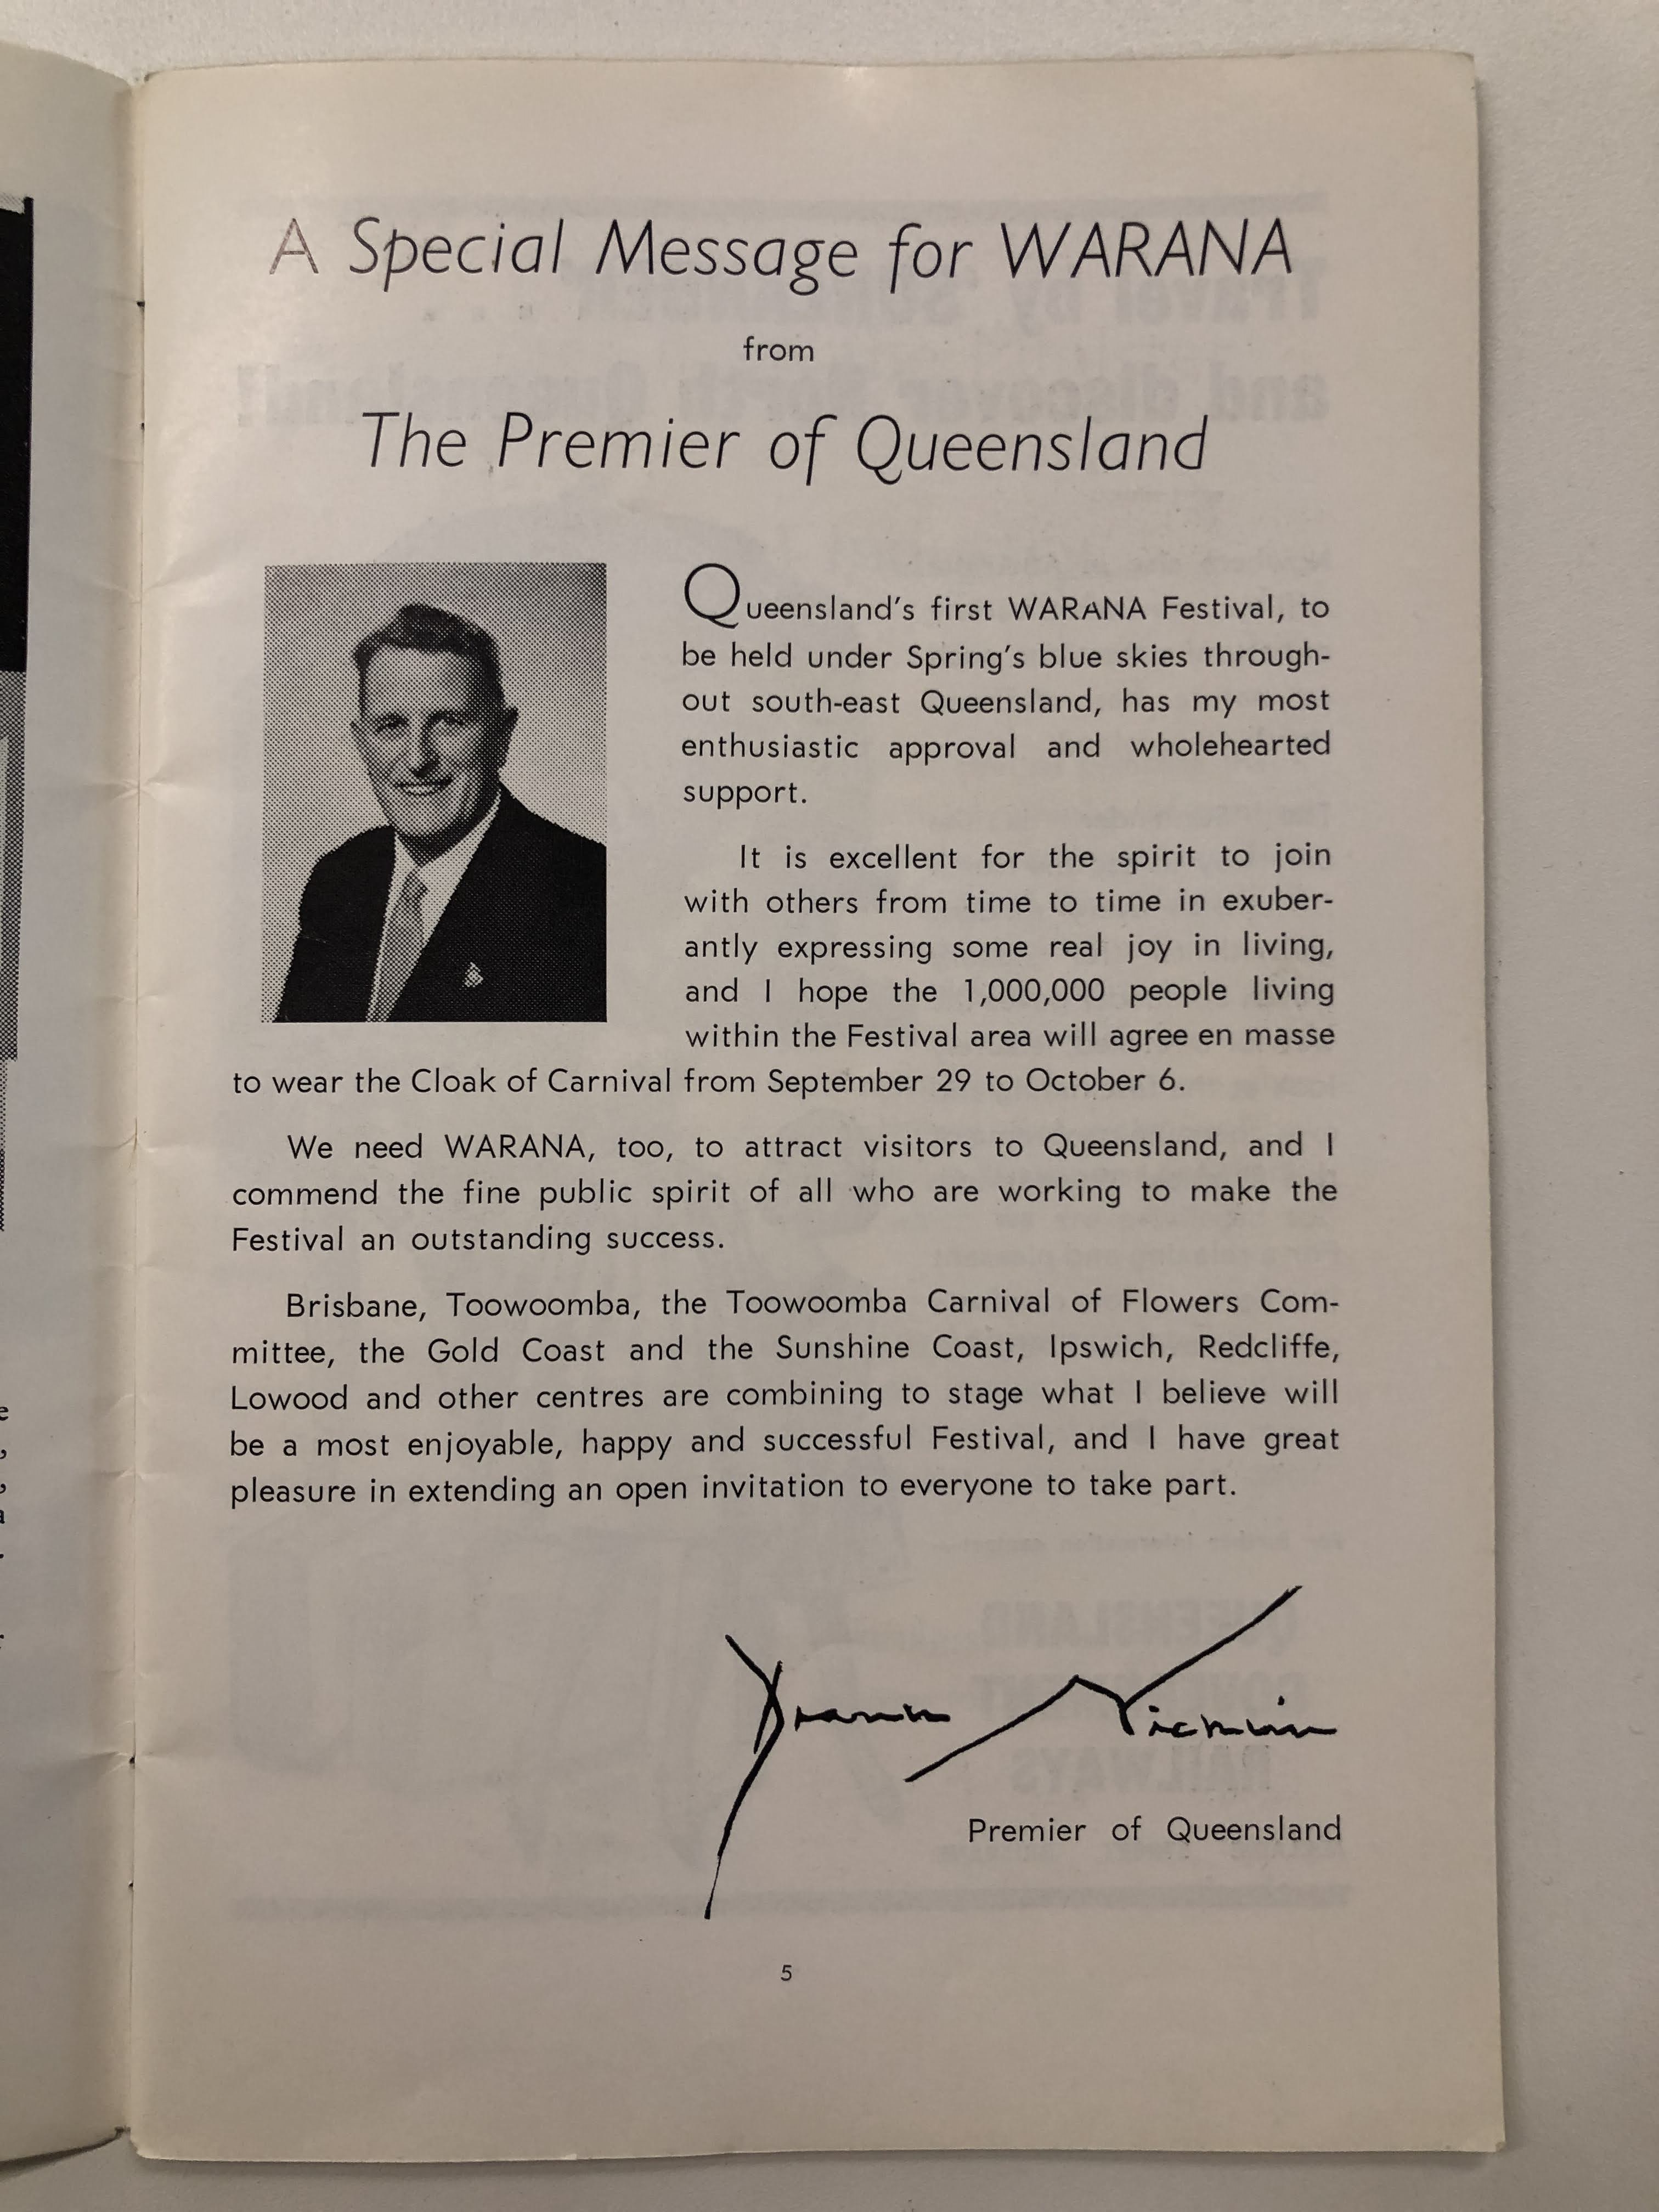 A special Message for Warana from the Premier of Queensland, Frank Nicklin, page 5, 1962 Warana Festival Program. The first Warana Festival.